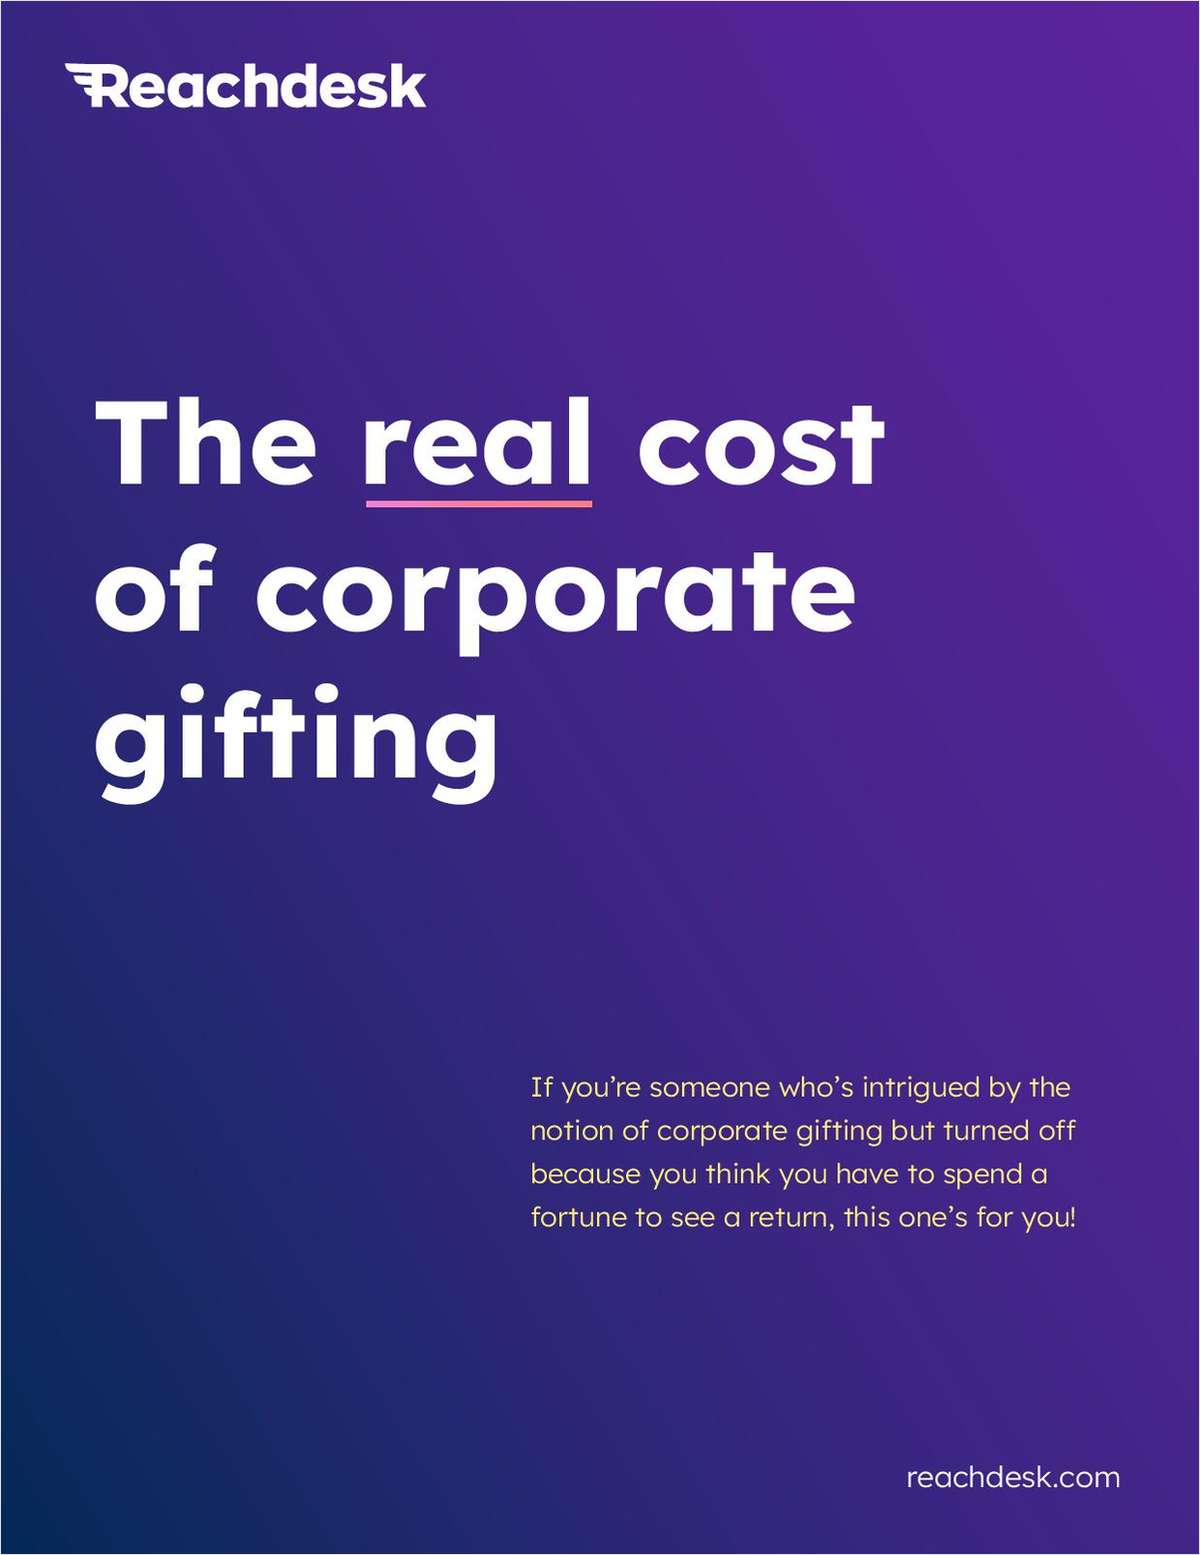 What's the real cost of corporate gifting?